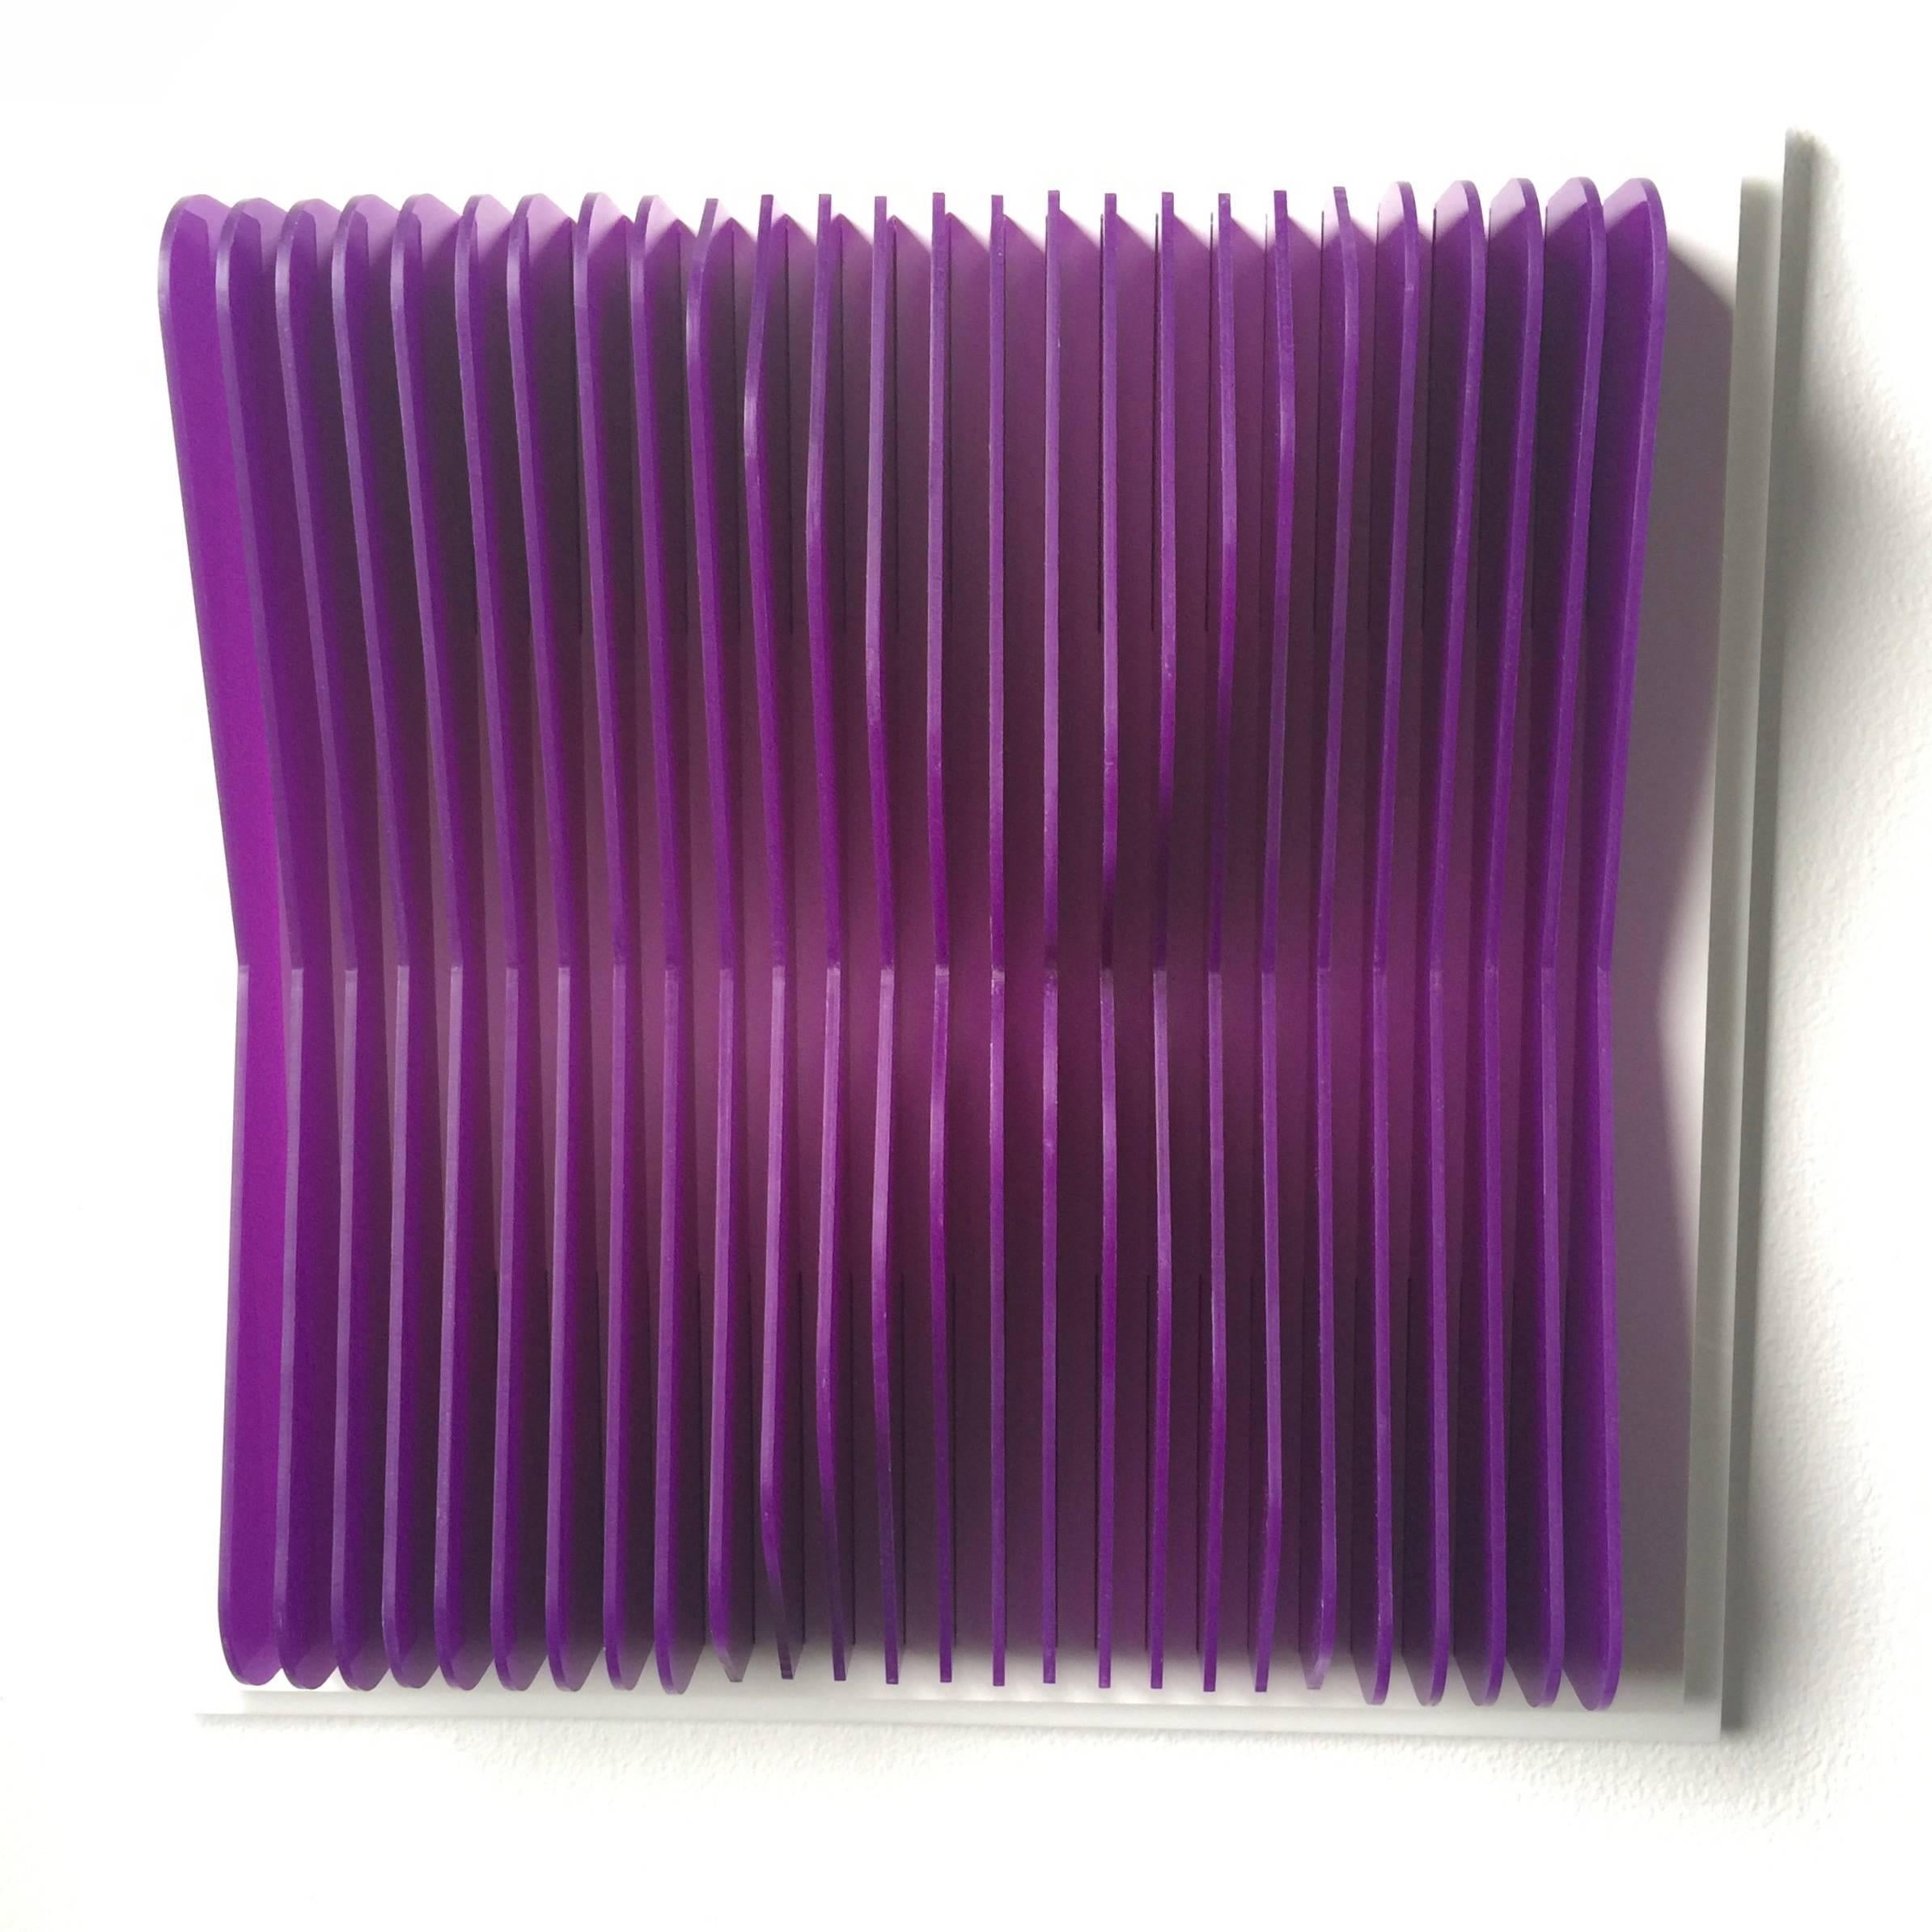 Pinched Purple - kinetic wall sculpture by J. Margulis - Sculpture by Jose Margulis